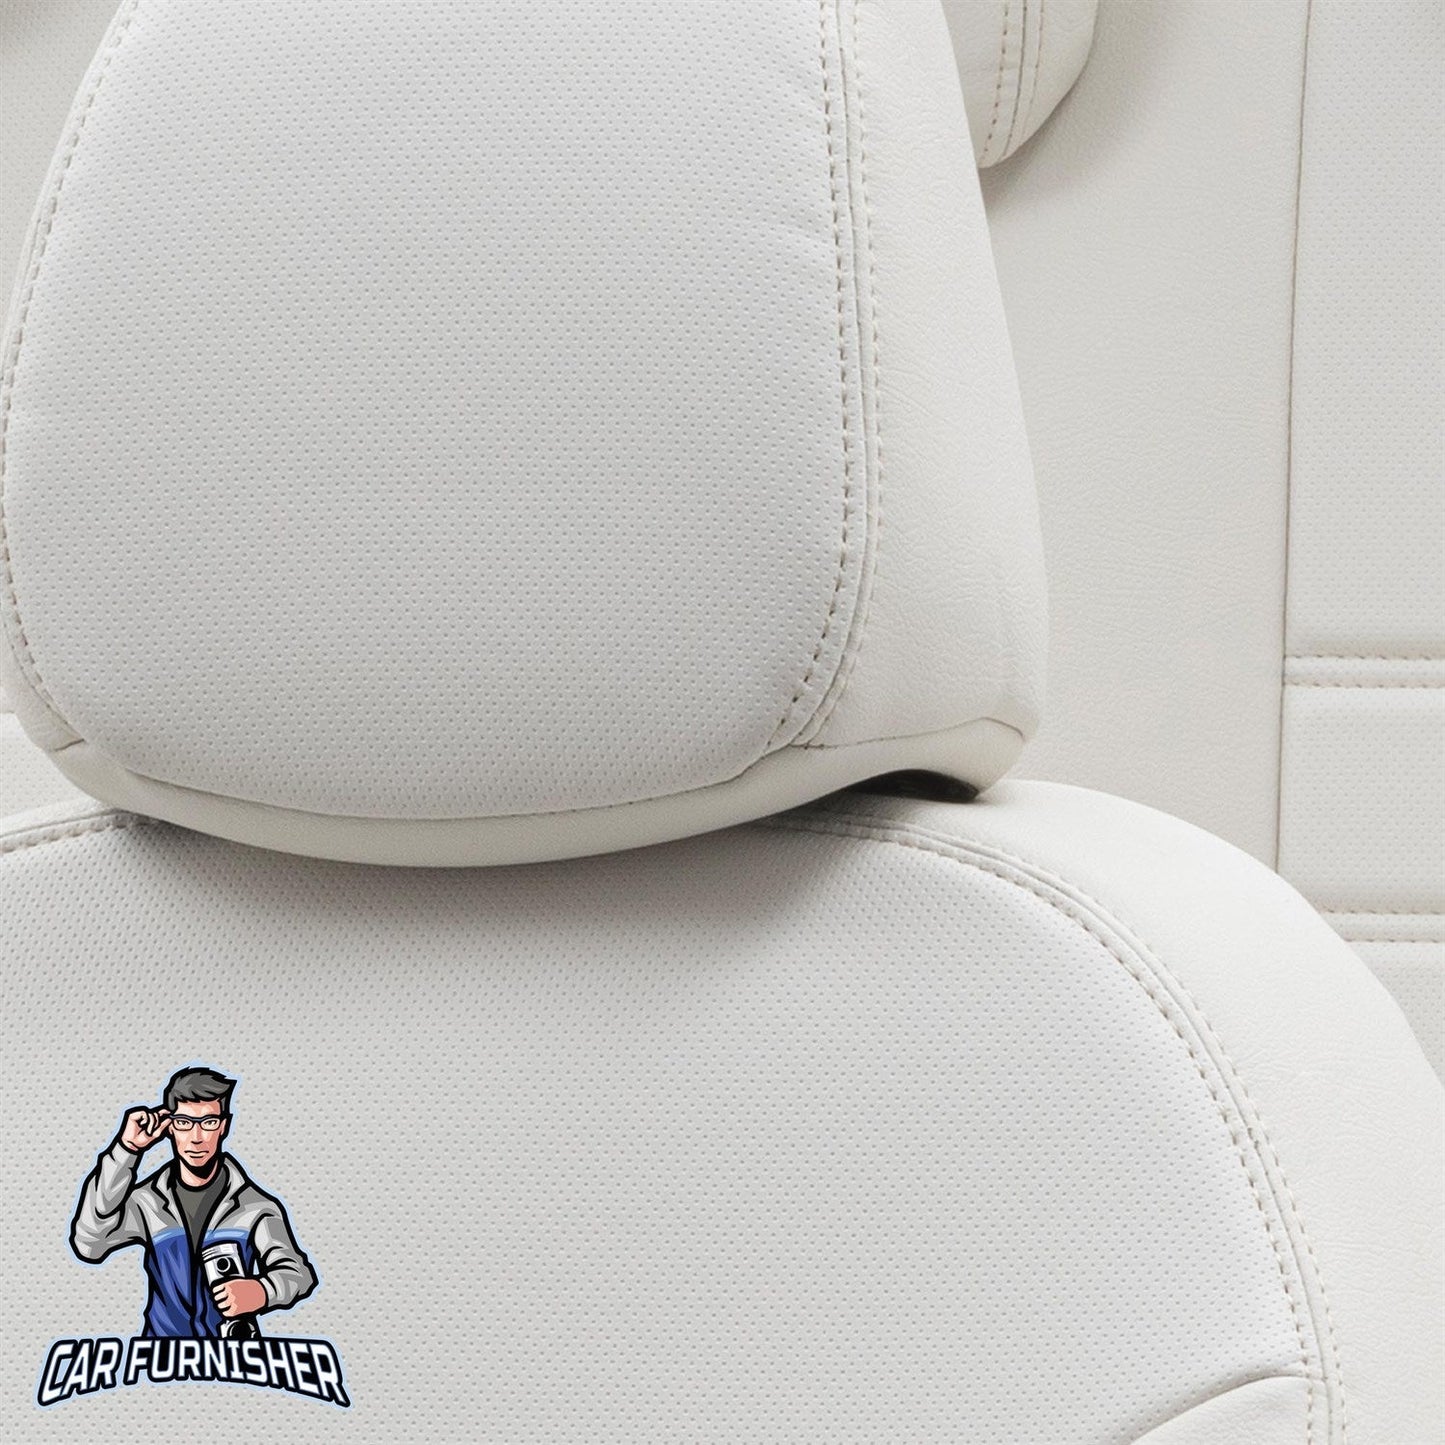 Chevrolet Cruze Seat Covers Istanbul Leather Design Ivory Leather